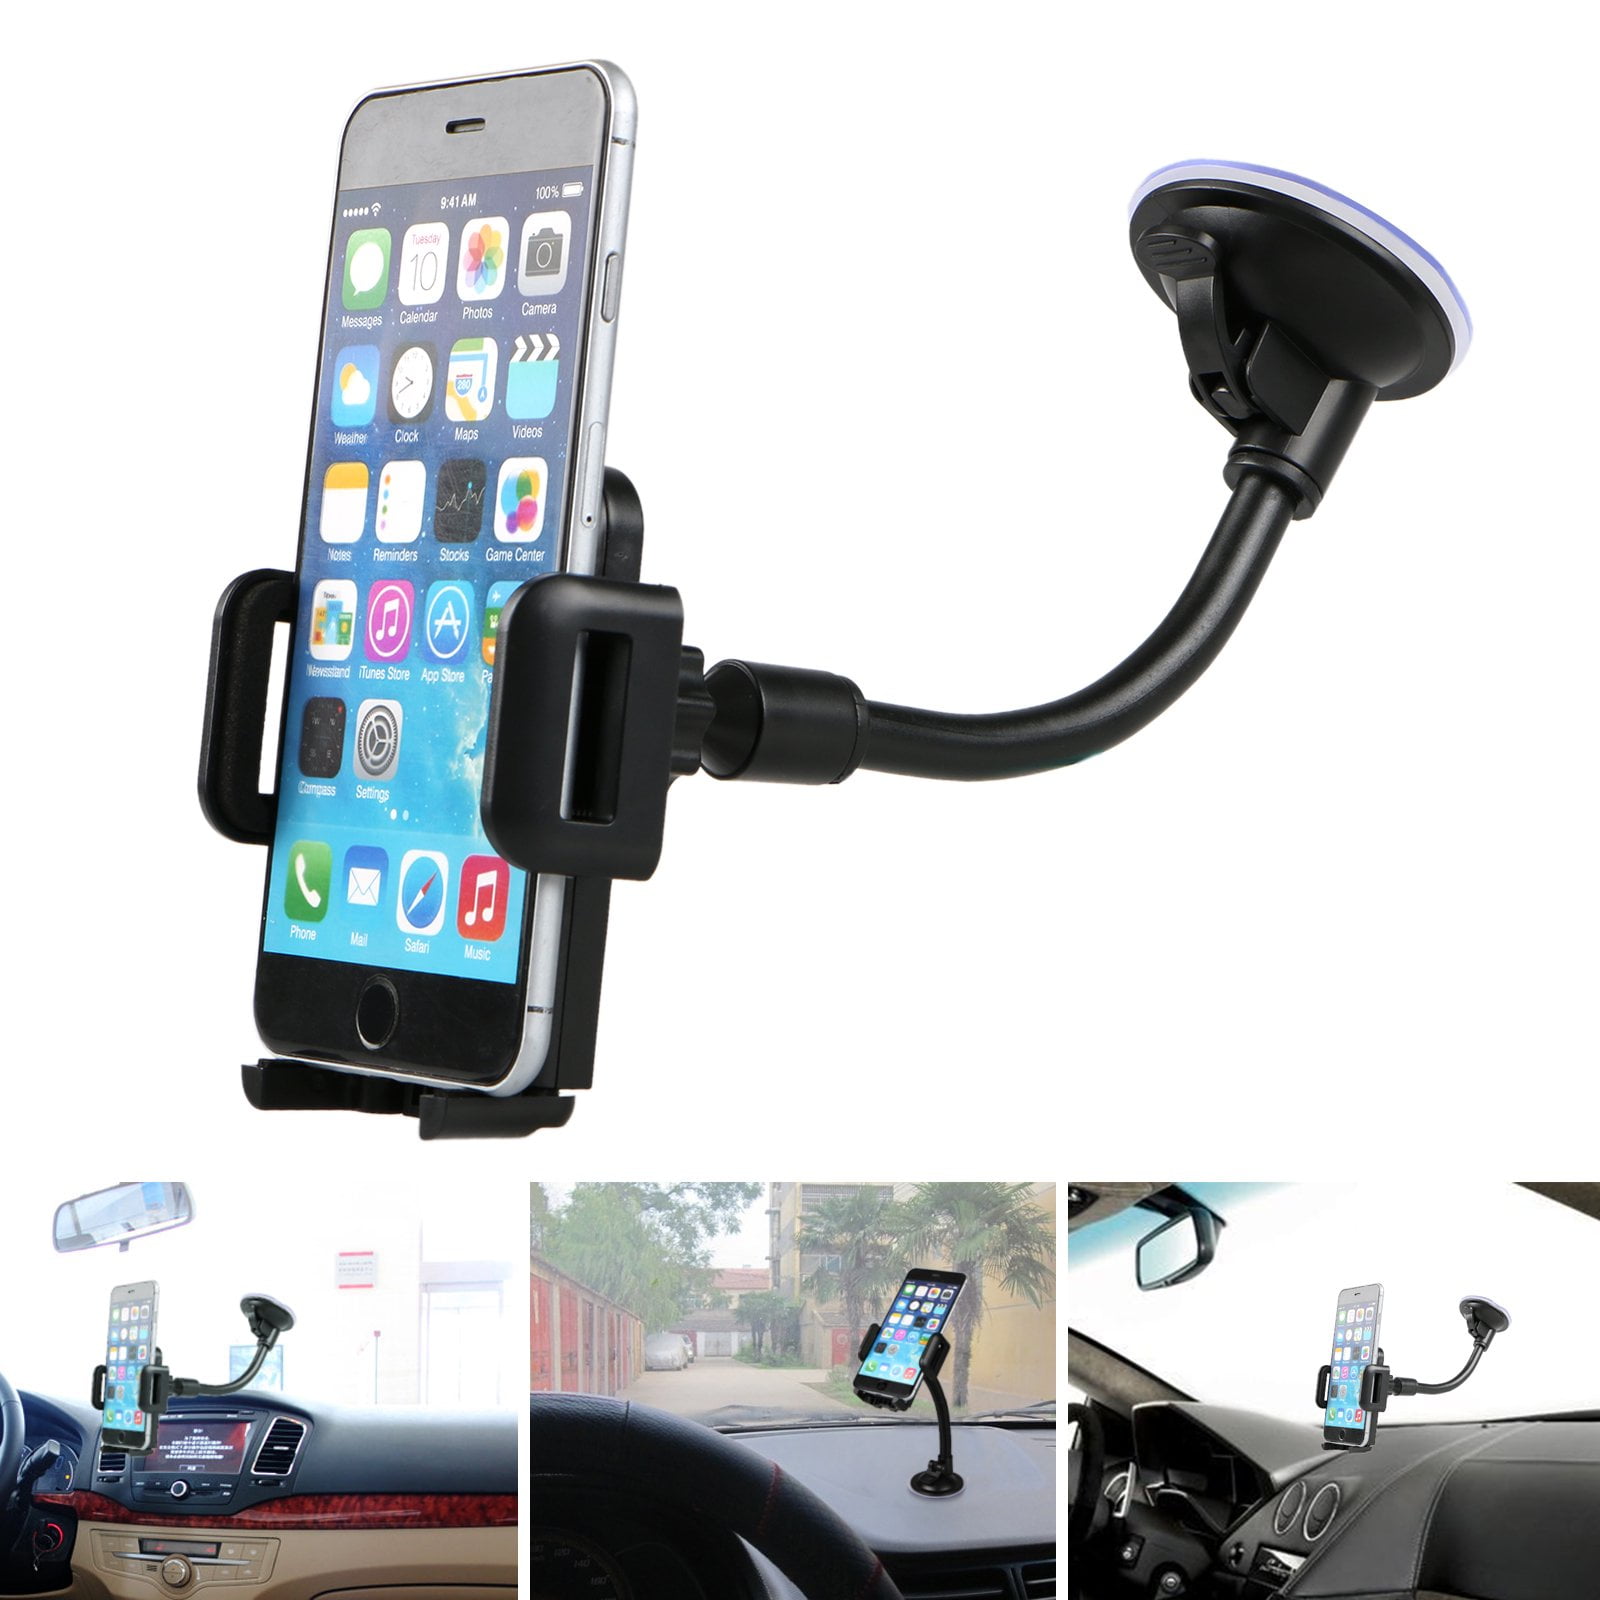 Insten Car Mount One Touch Quick Snap Phone Holder 360 Degree Rotation Cradle Compatible with iPhone X/XS/XS Max/XR/8/Samsung Galaxy S10/S10 Plus/S10e/S9/S9+/S8/S8+/LG eForCity 4351578021 Car Air Vent Phone Holder